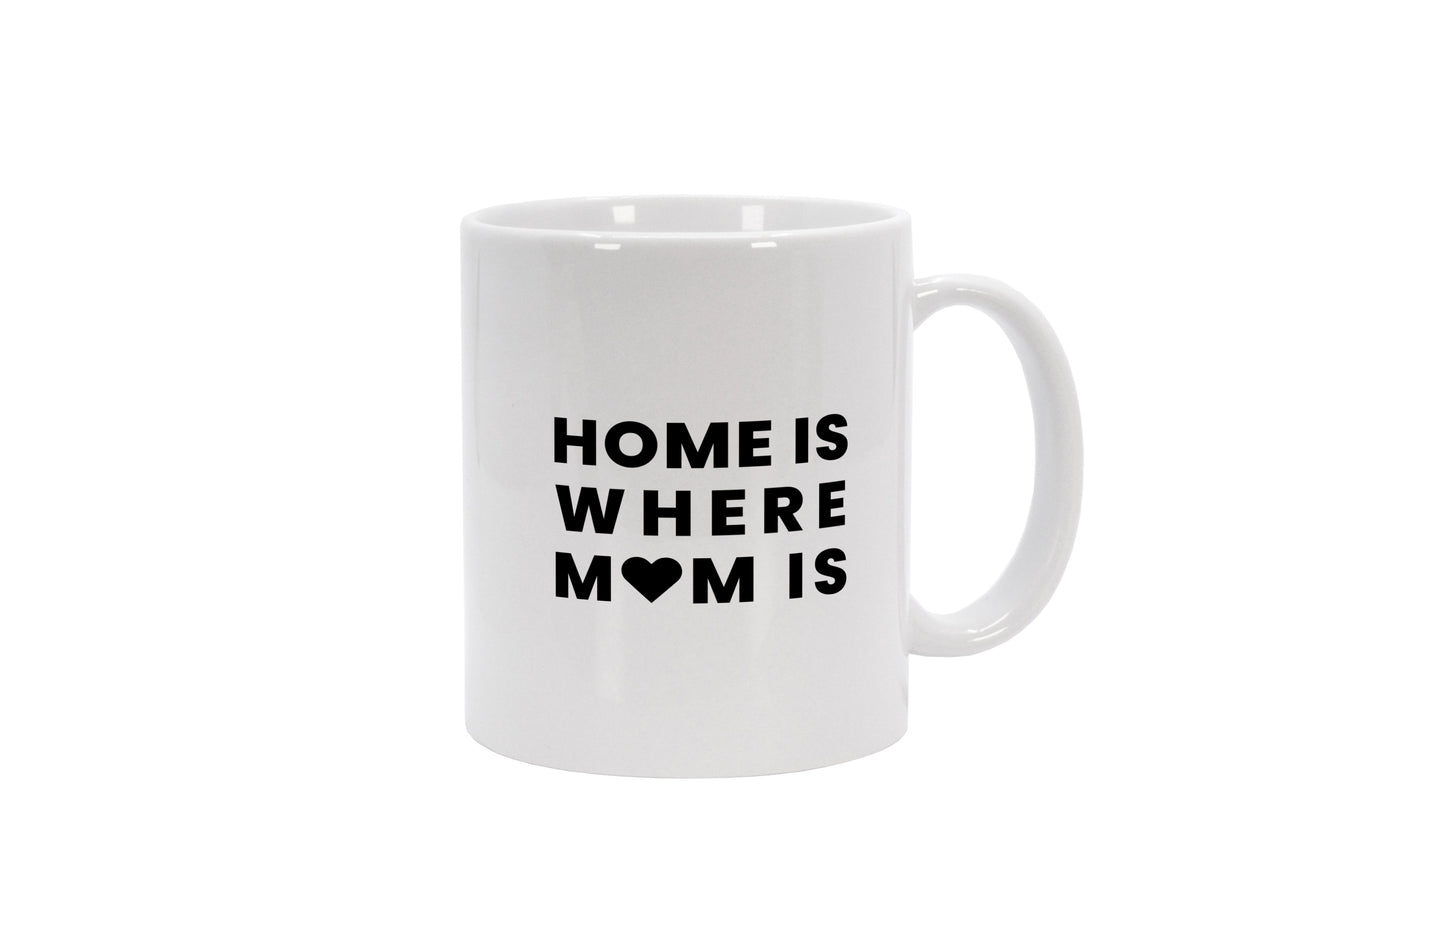 Tasse Home is where mom is